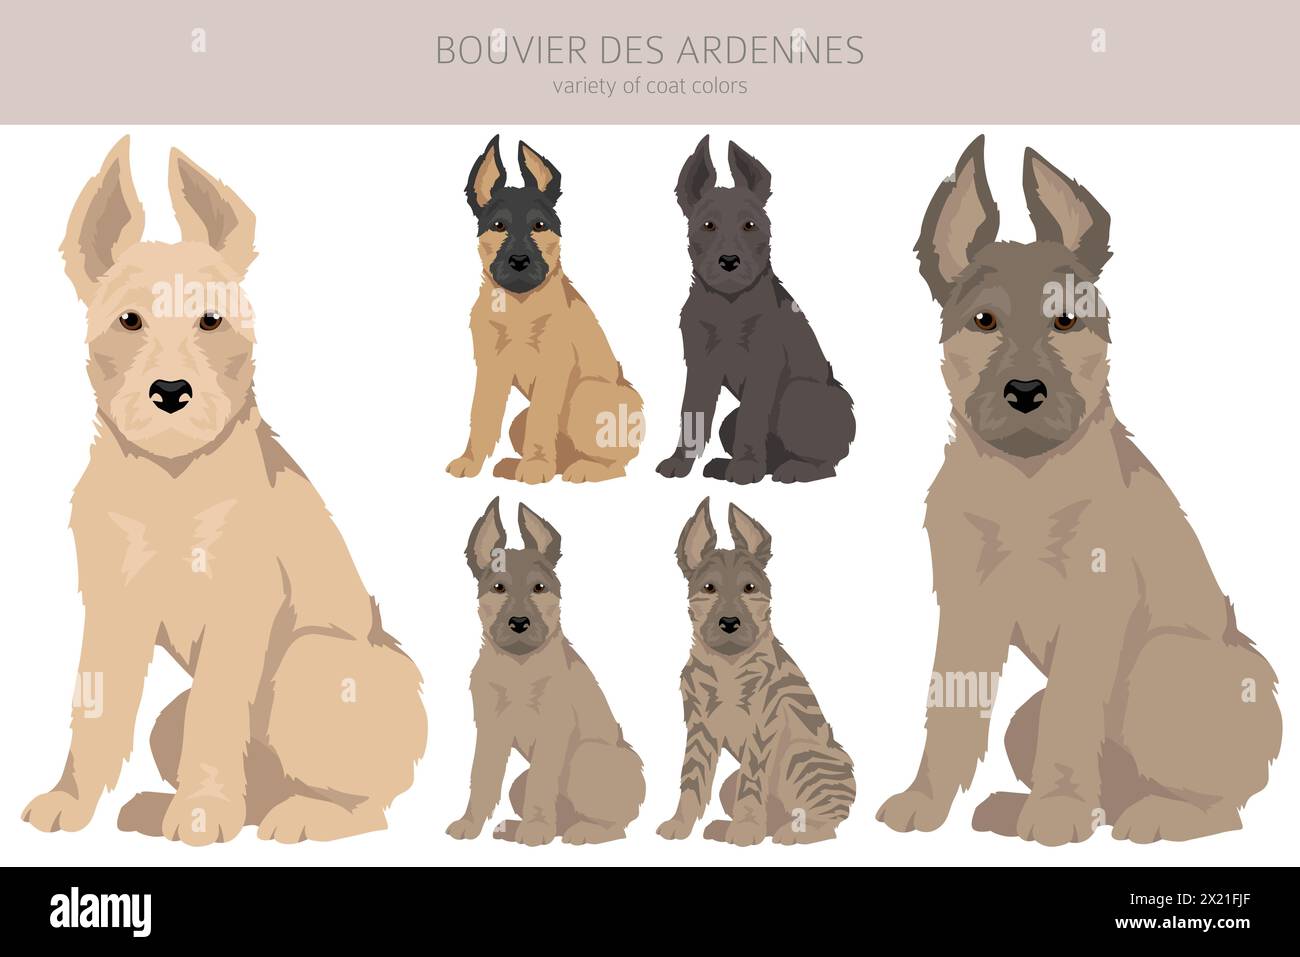 Bouvier des Ardennes puppy clipart. Different coat colors and poses set.  Vector illustration Stock Vector